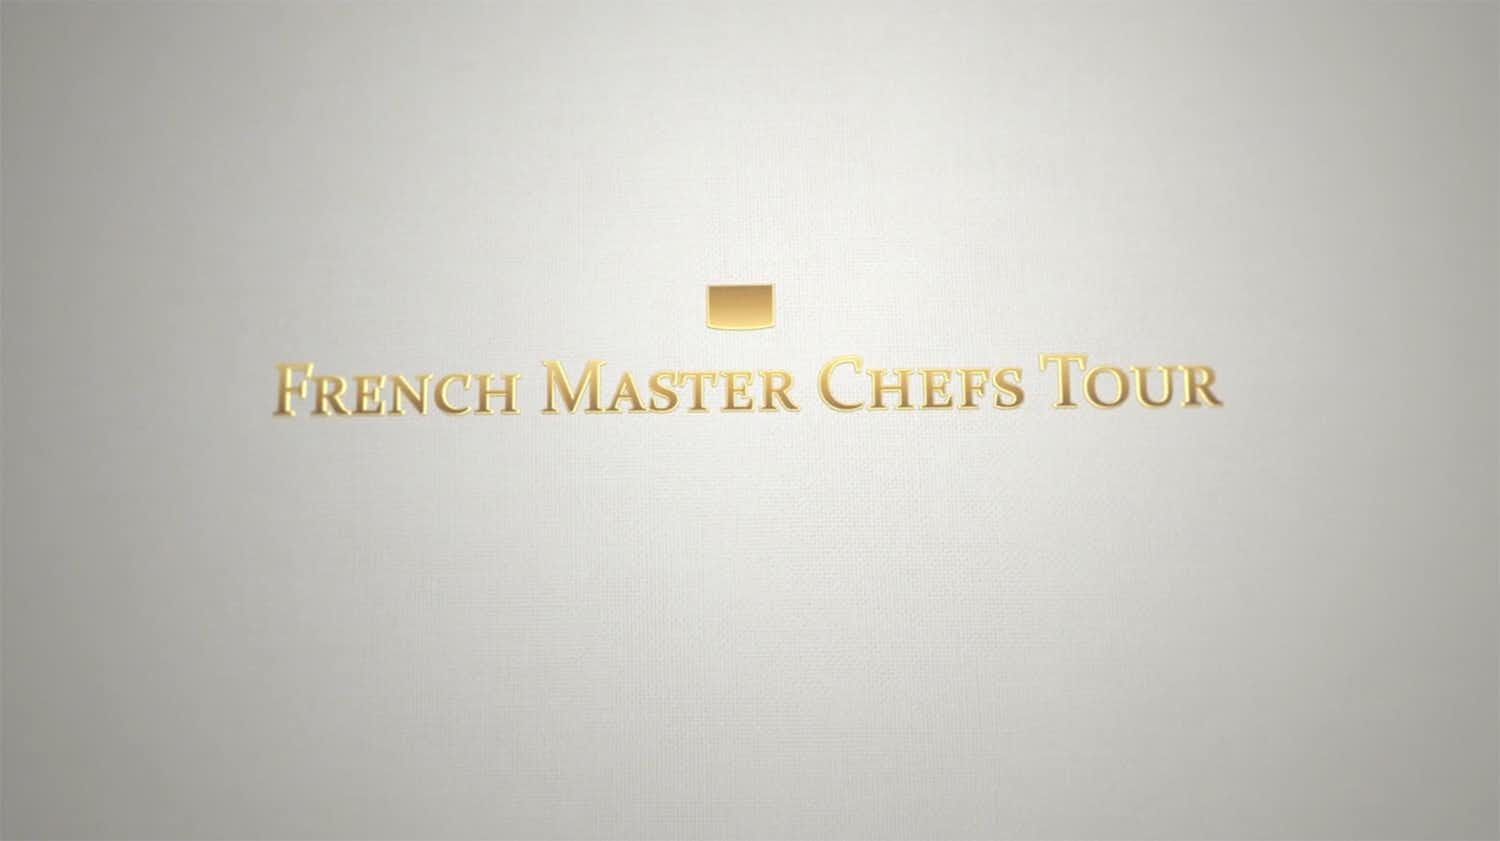 Front-end dev • French master chefs tour